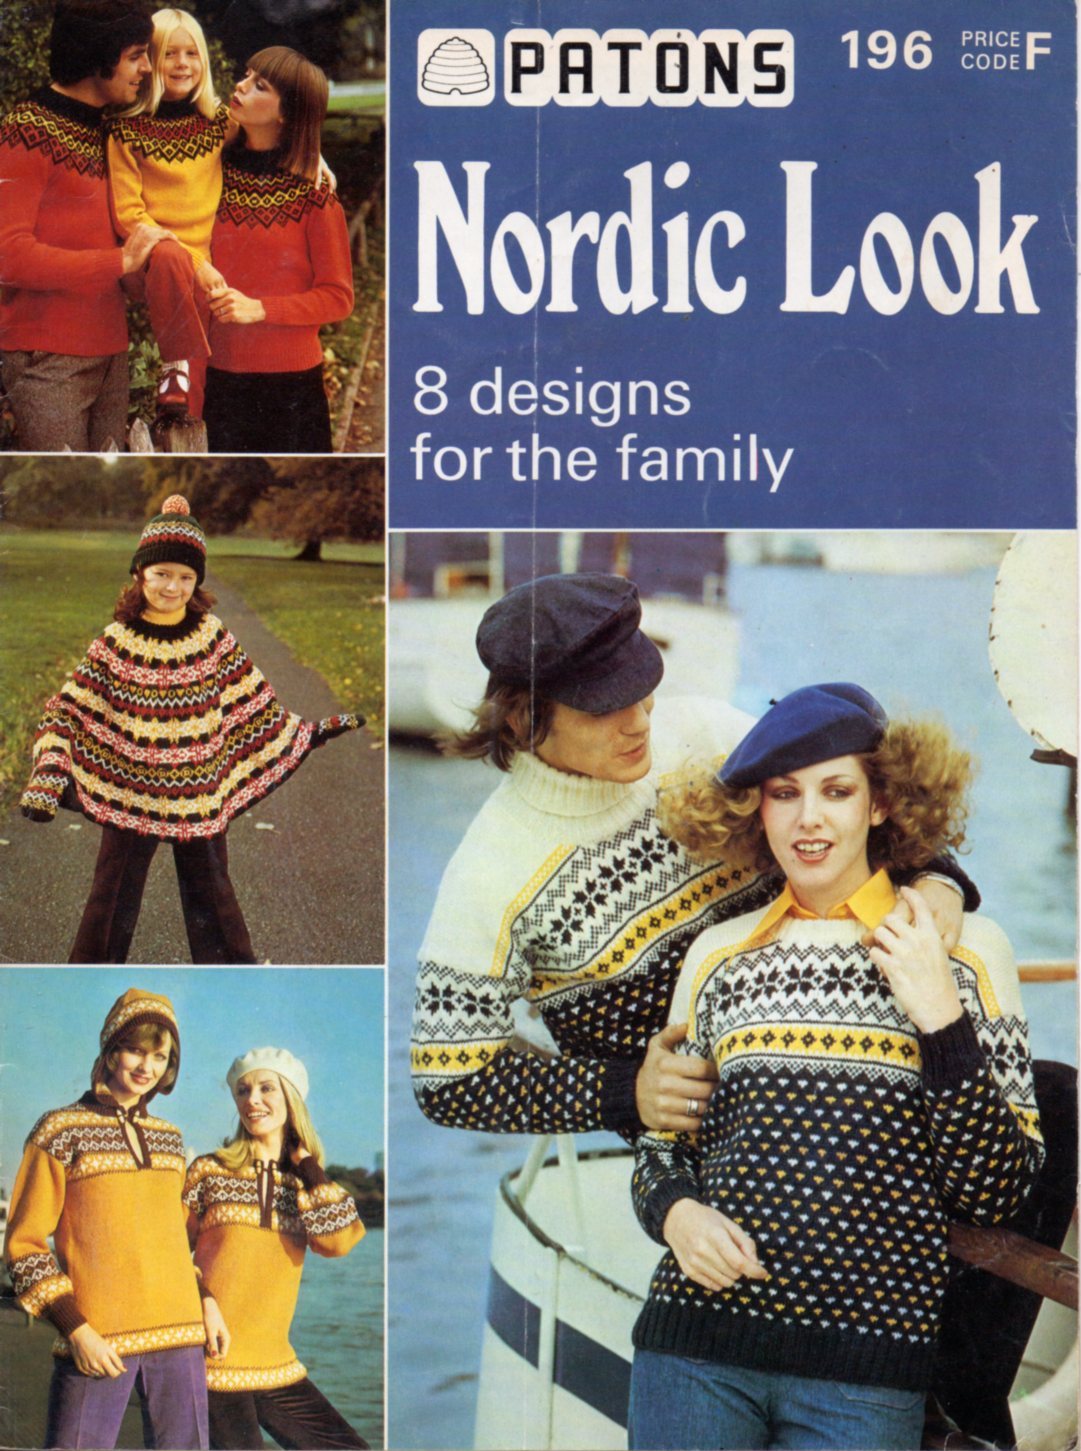 Cover of Patons 196 - Nordic Look.Photos of models wearing sweaters with geometric design coloured yokes, and a young girl wearing aponcho with geometric designed mittens and hat.